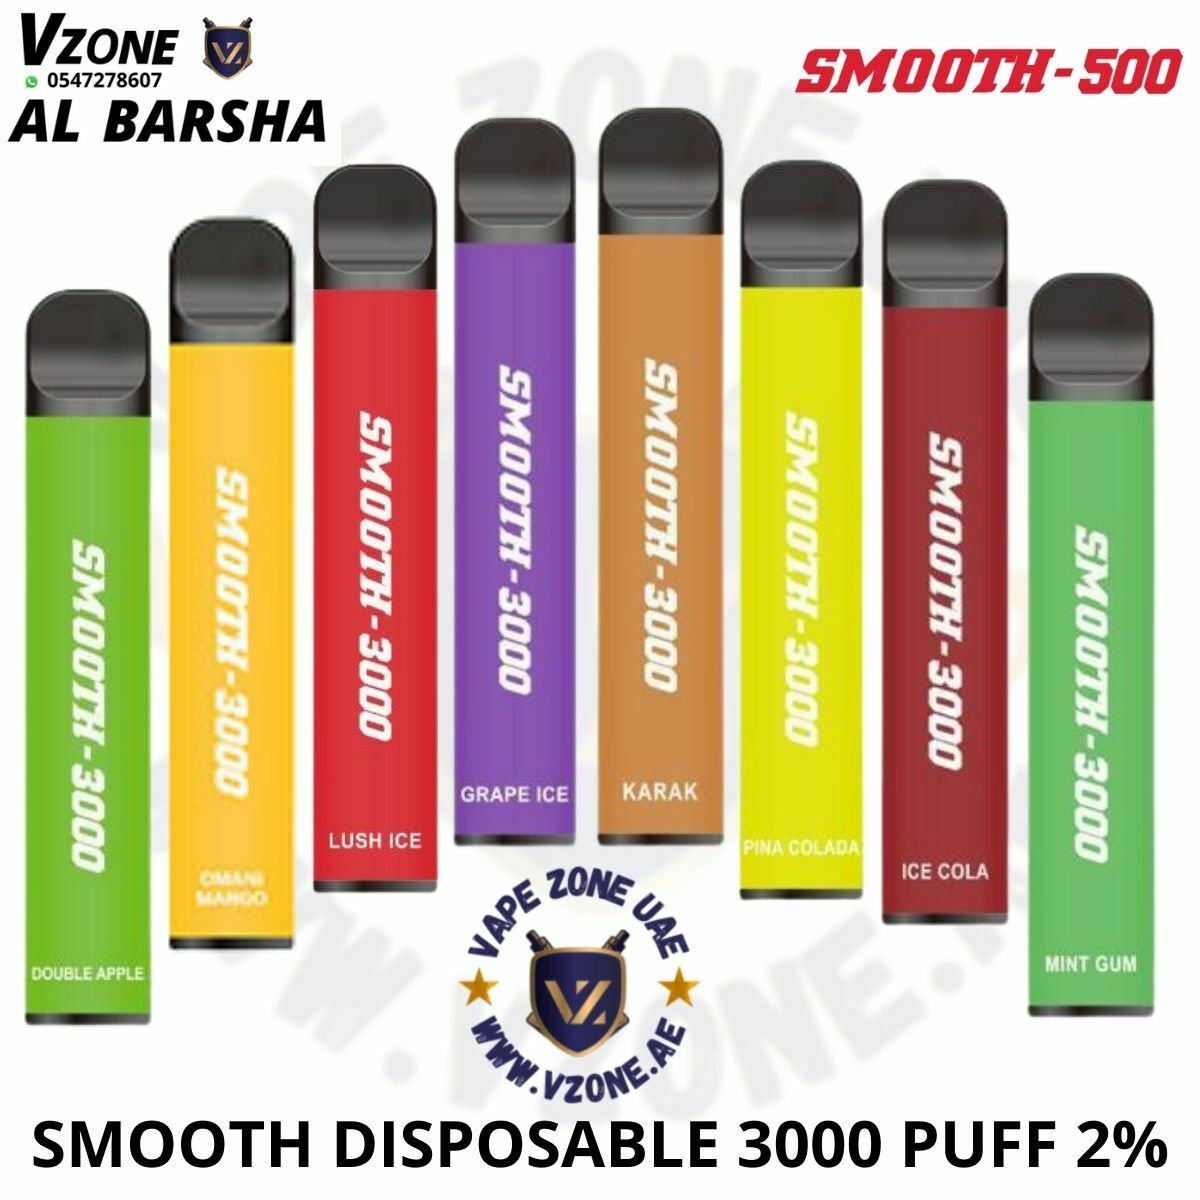 SMOOTH DISPOSABLE